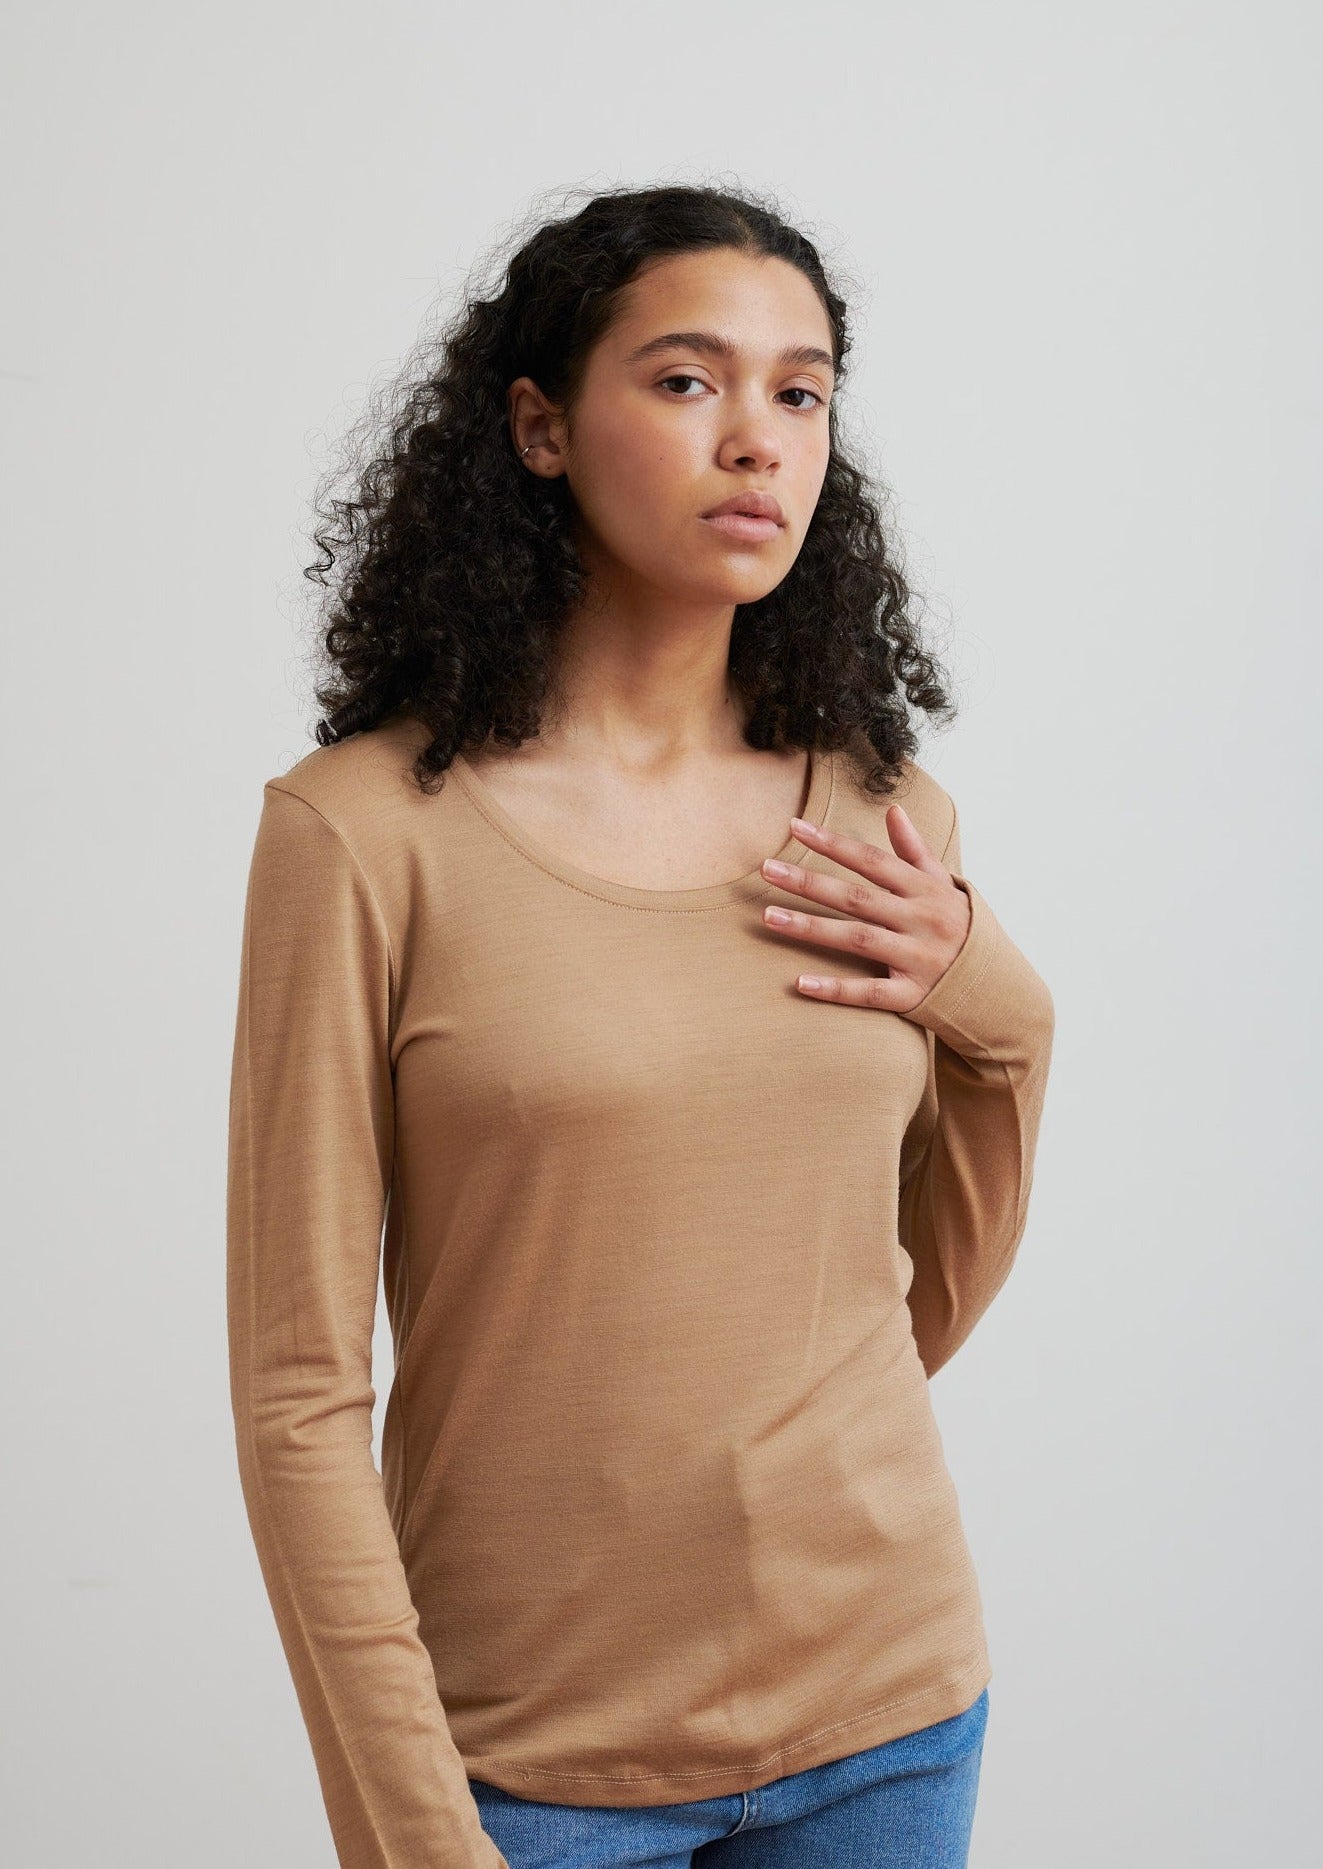 Detailed with a scoop neckline, this layering essential in merino is soft and breathable to wear all seasons. Made from certified ethical wool from New Zealand farms.